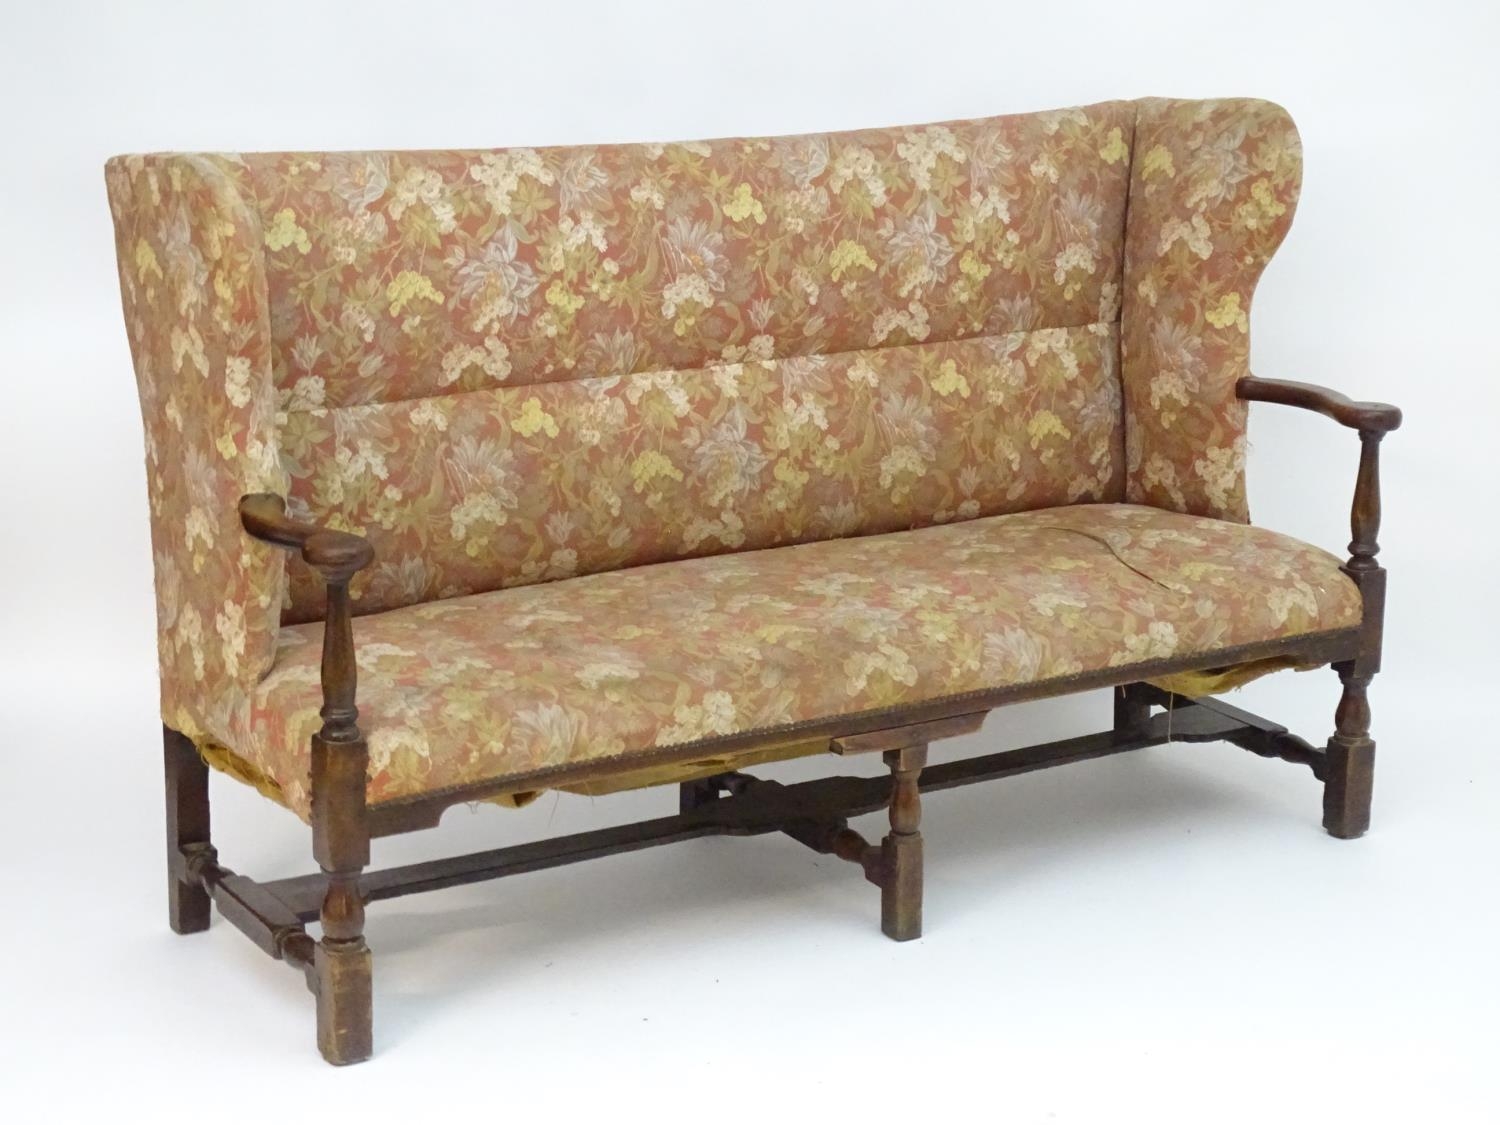 A mid 18thC wingback sofa with scrolled arms and an upholstered backrest and seat above a - Image 12 of 12